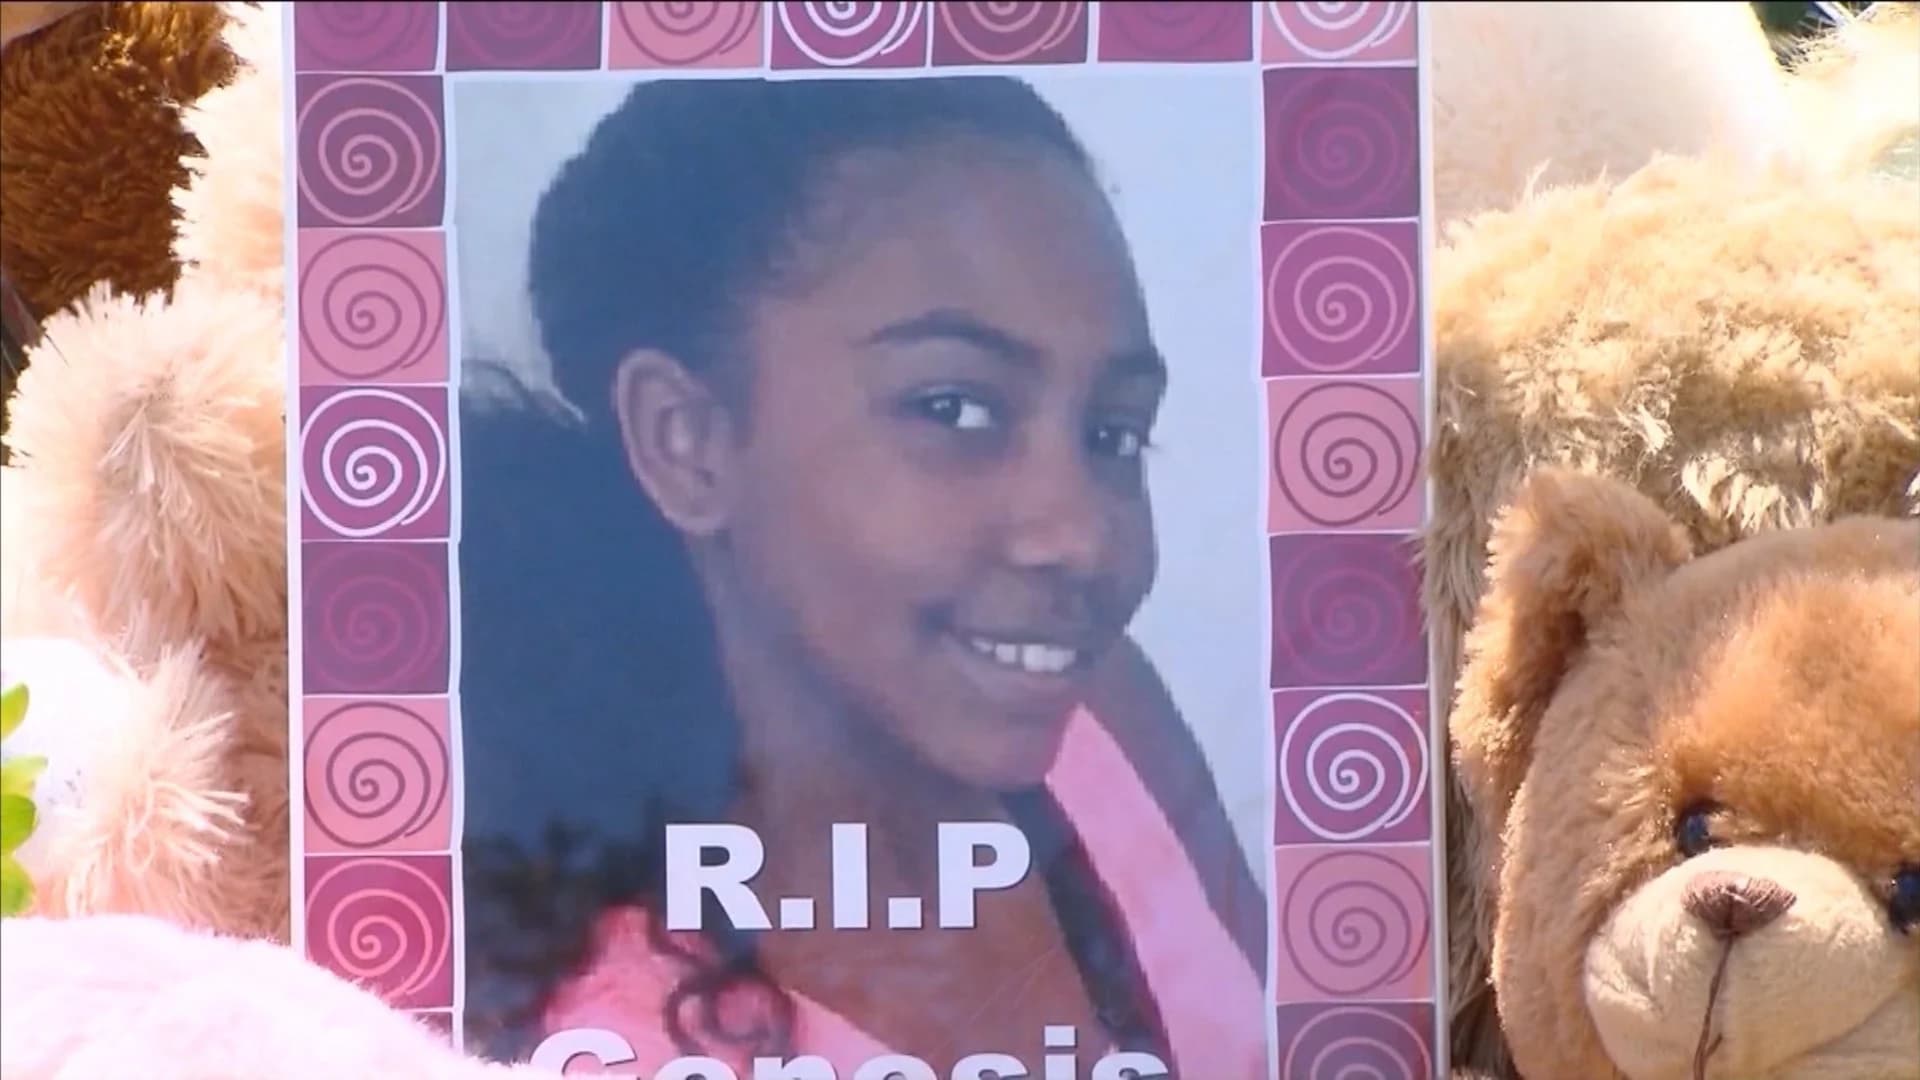 Man pleads guilty in death of 12-year-old Genesis Rincon, plus another killing